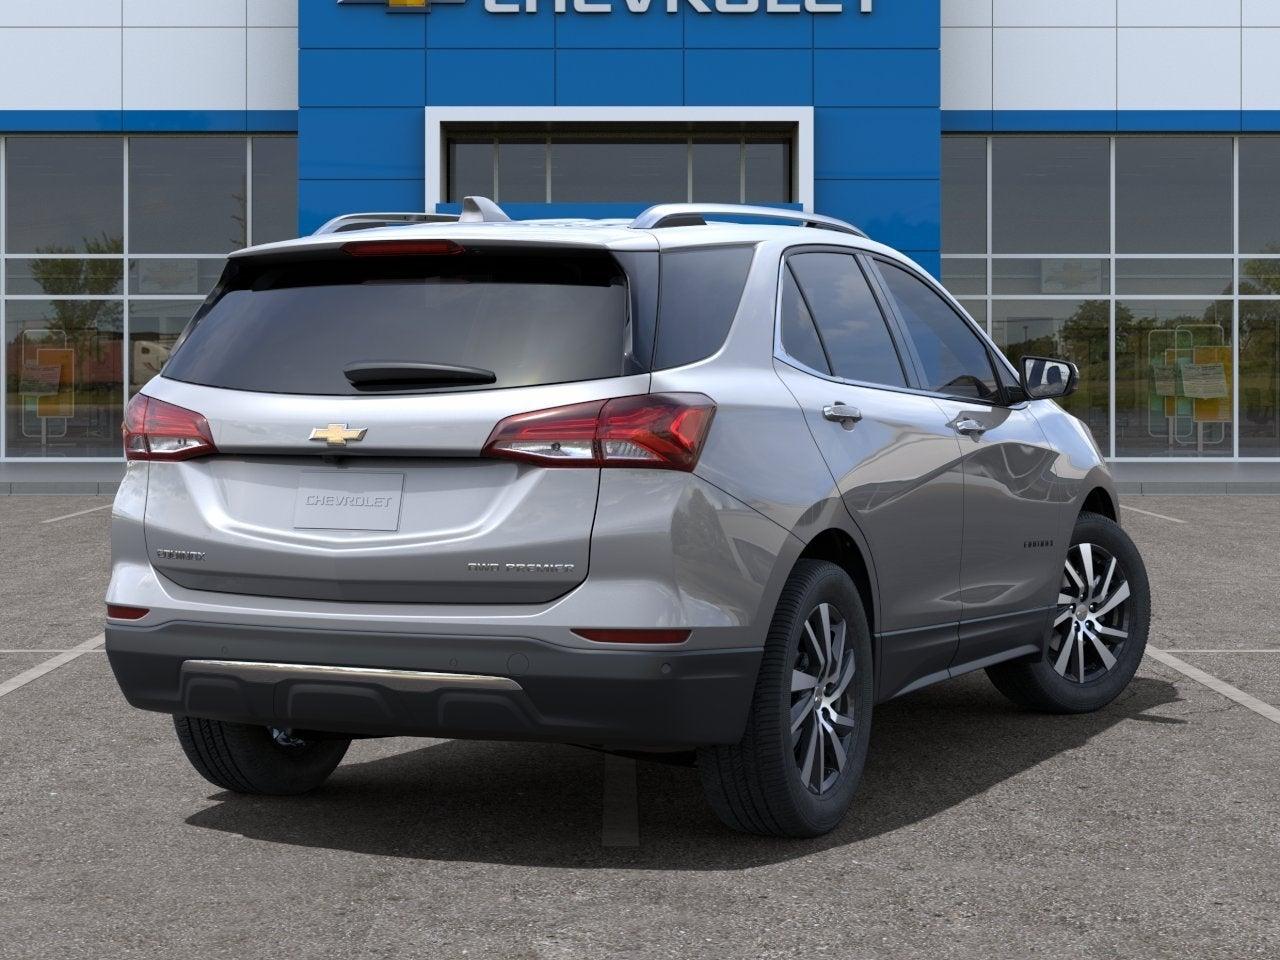 2023 Chevrolet Equinox Photo in Wooster, OH 44691